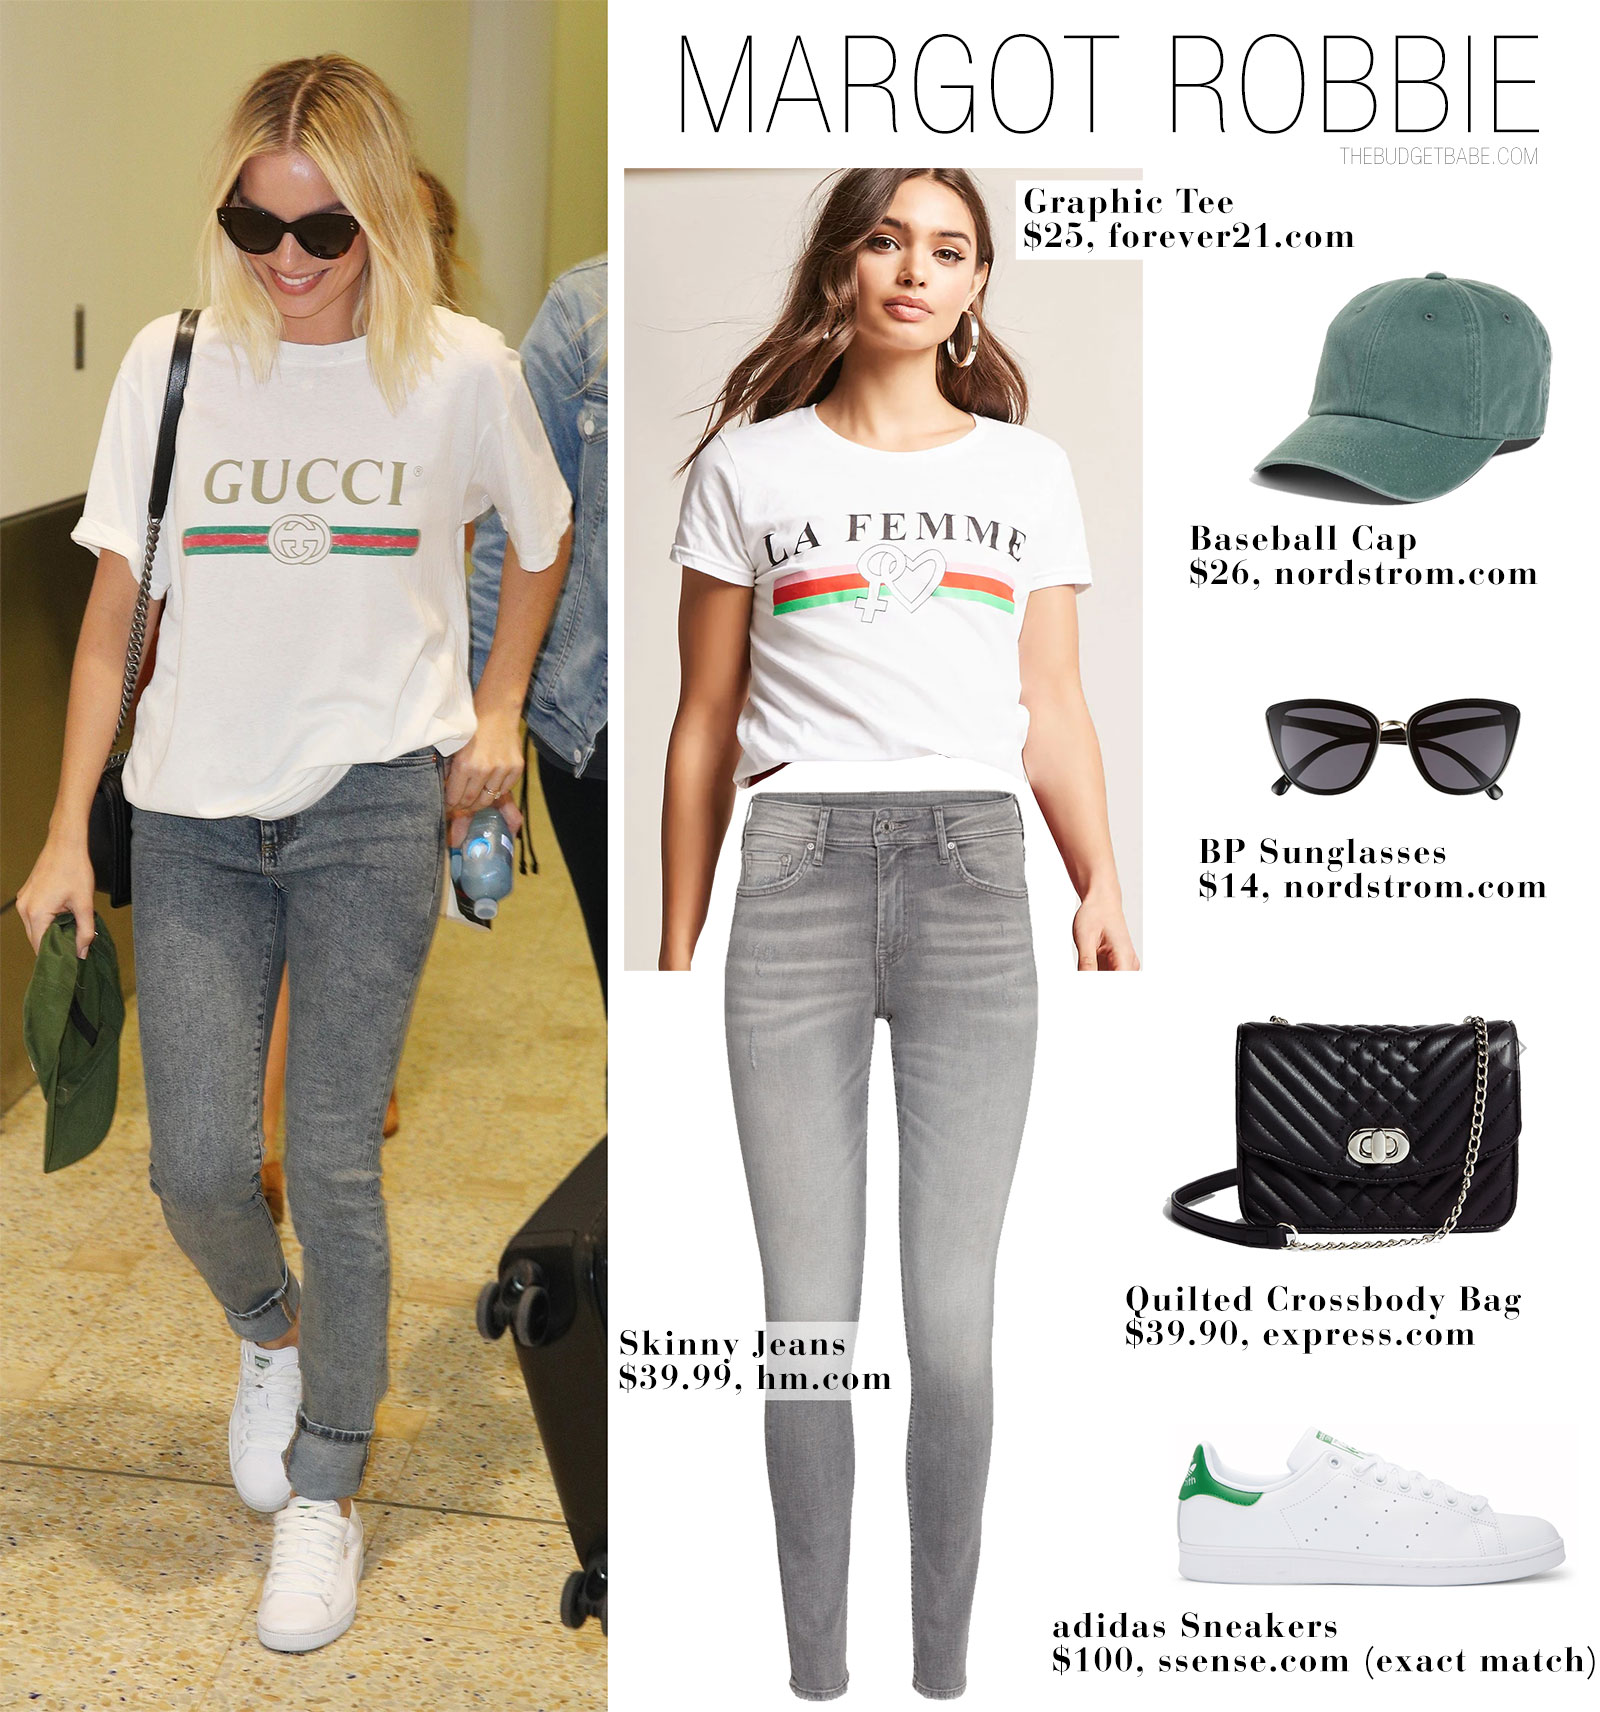 Margot Robbie wears a Gucci logo t-shirt with skinny jeans and Adidas Stan Smith sneakers.